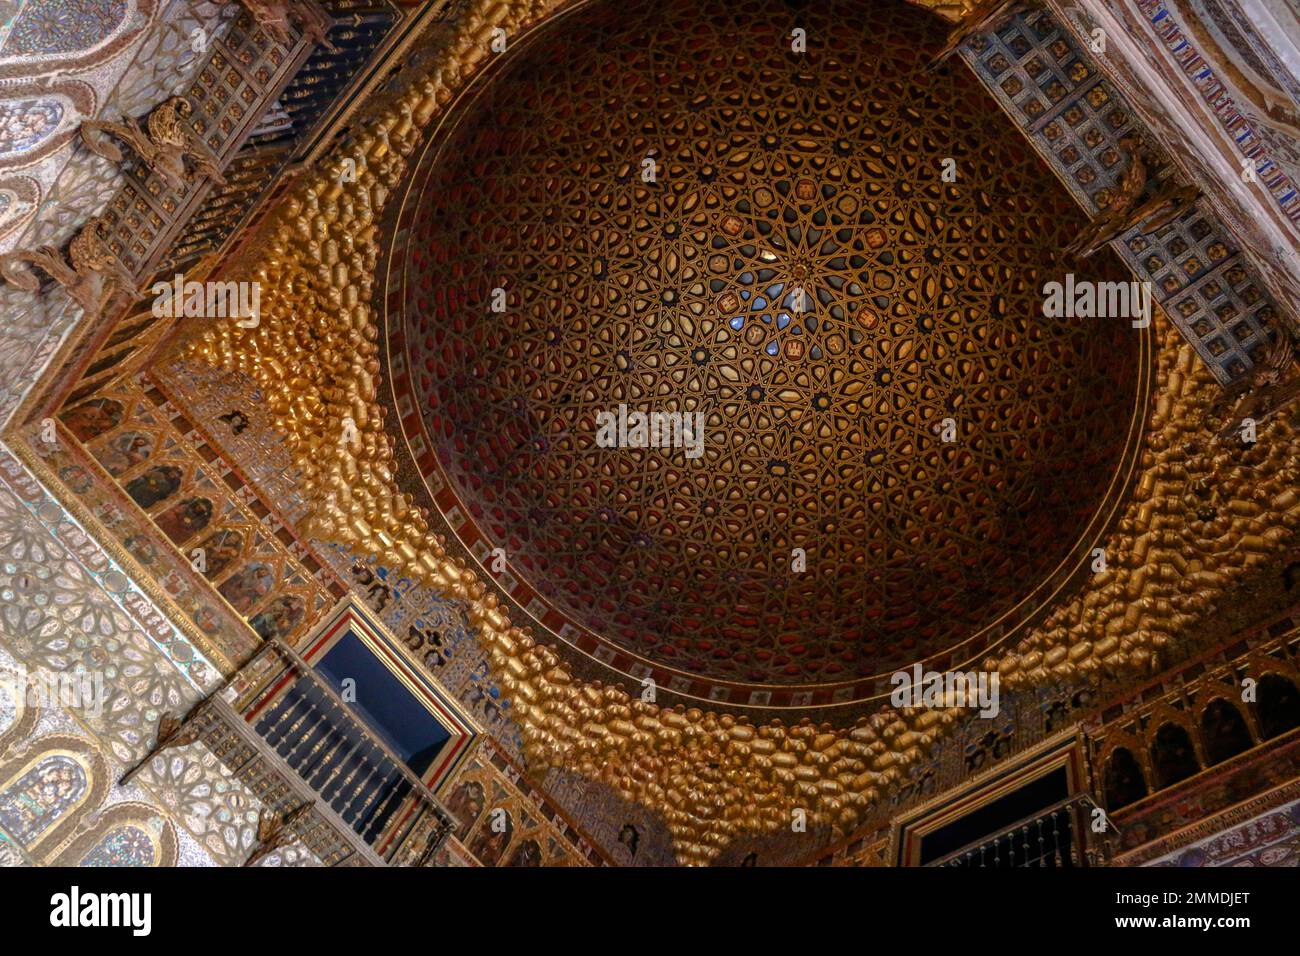 Interiors of Alcazar palace in the city of Seville, Spain Stock Photo